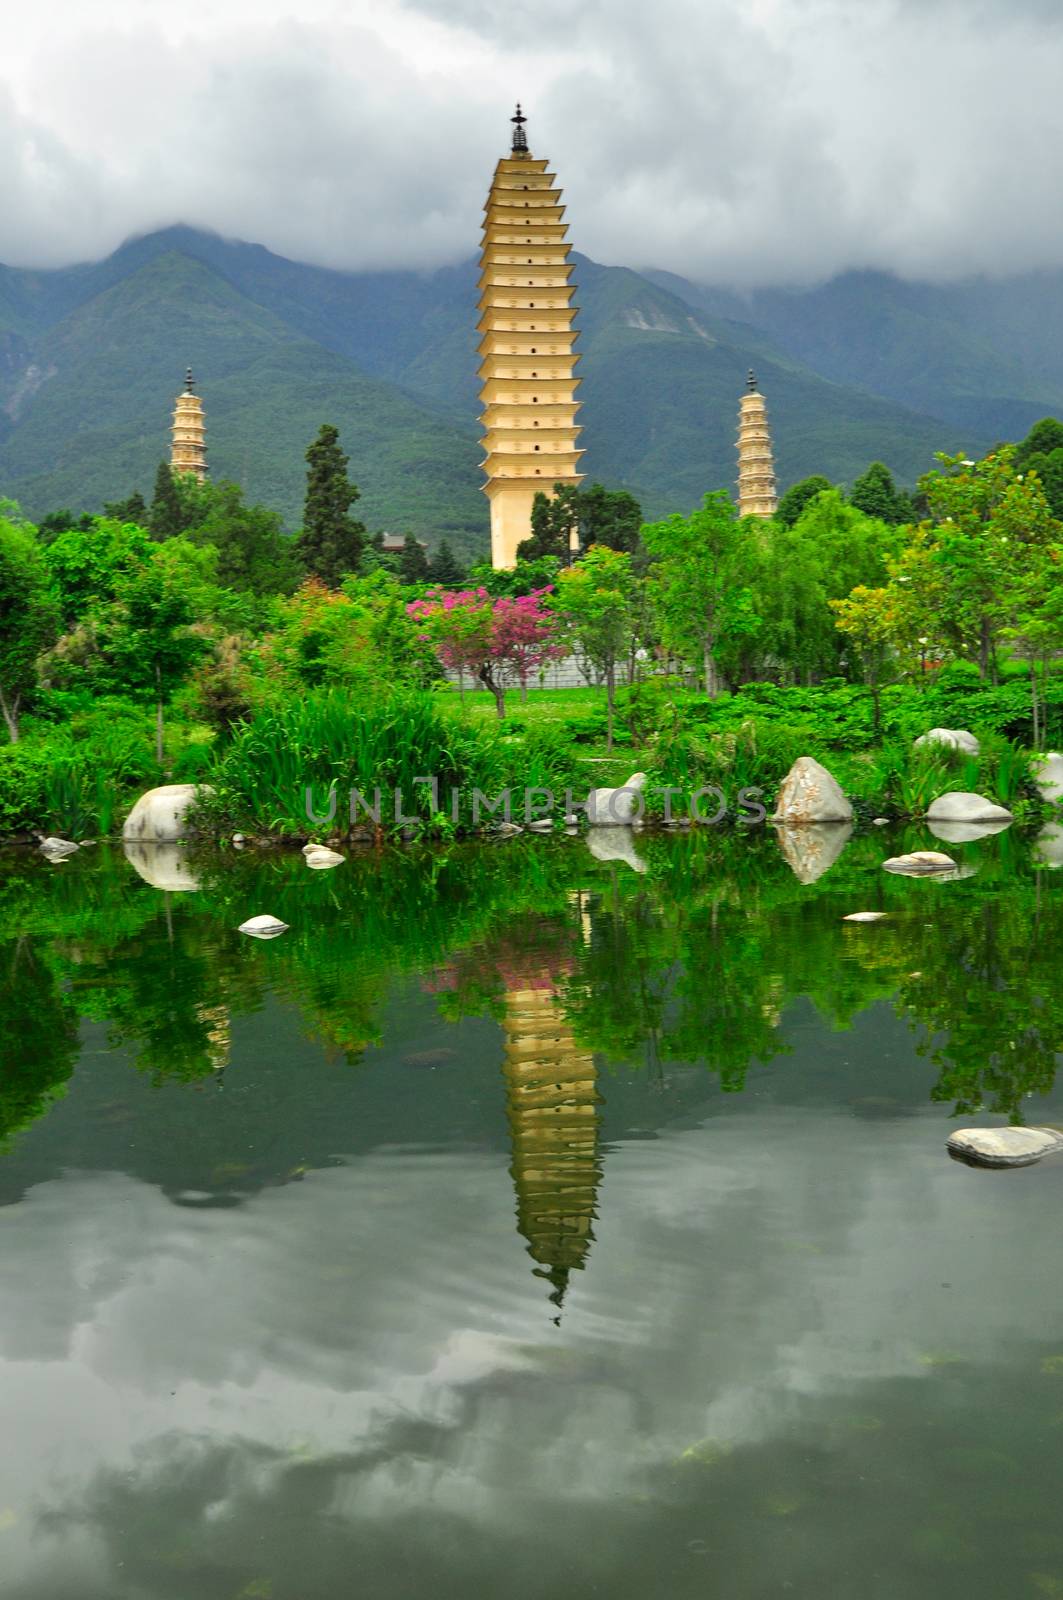 Rebuild Song dynasty town in dali, Yunnan province, China. Three pagodas and water with reflection